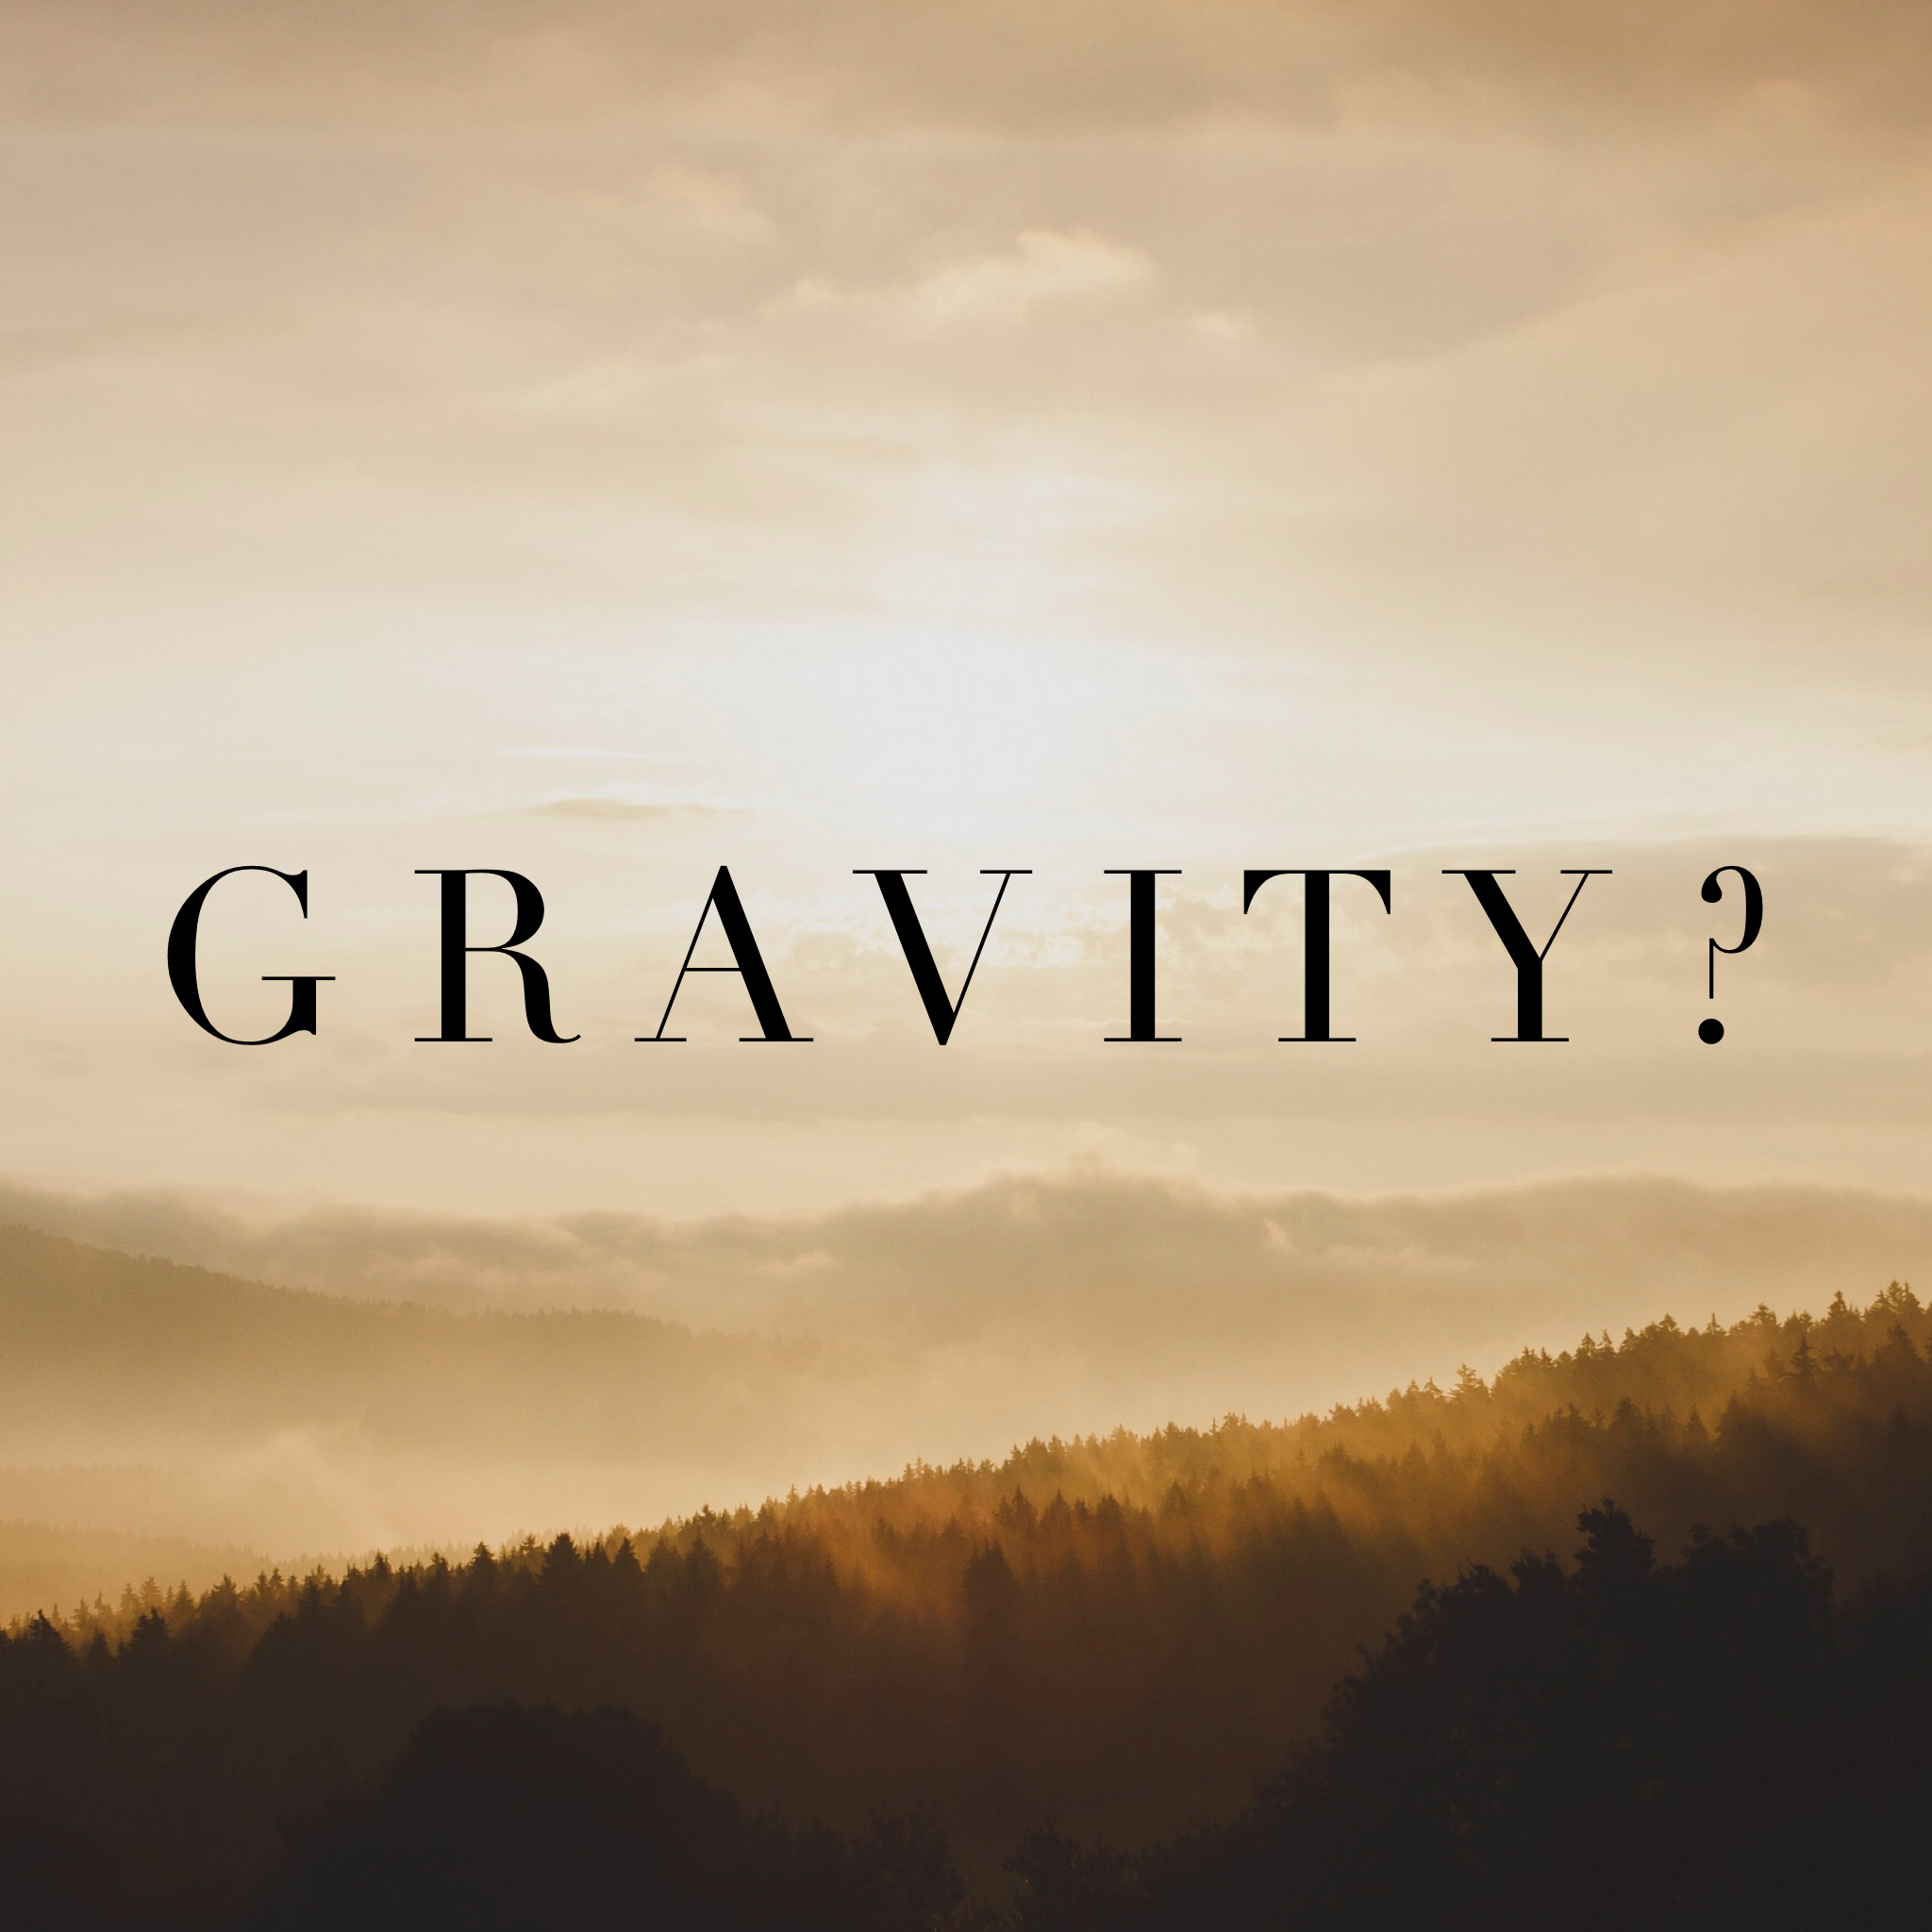 How can I reduce anxiety and stress, and what does gravity have to do with it?